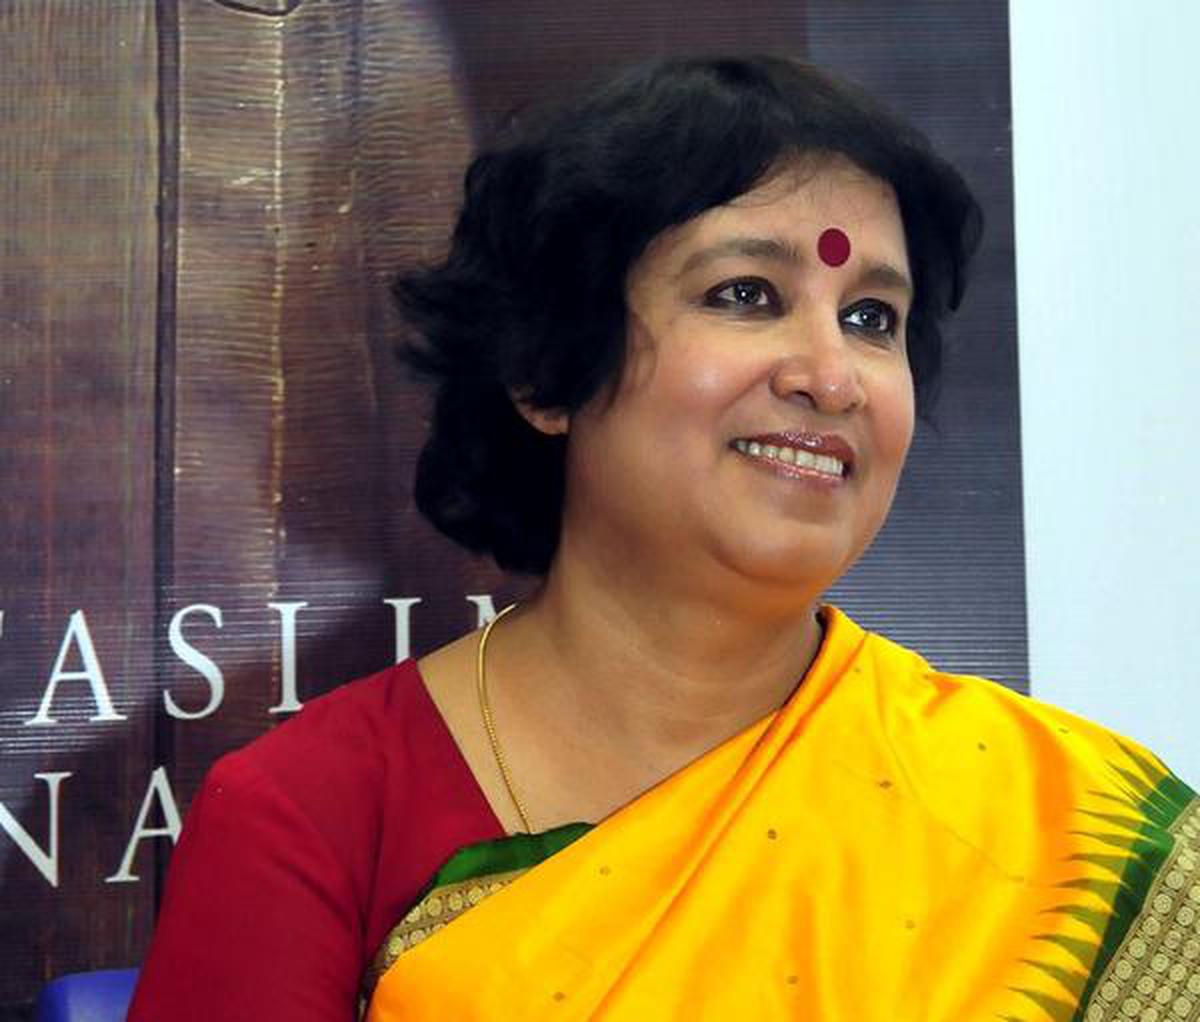 Do away with customs that deny women their rights, says Taslima Nasrin -  The Hindu